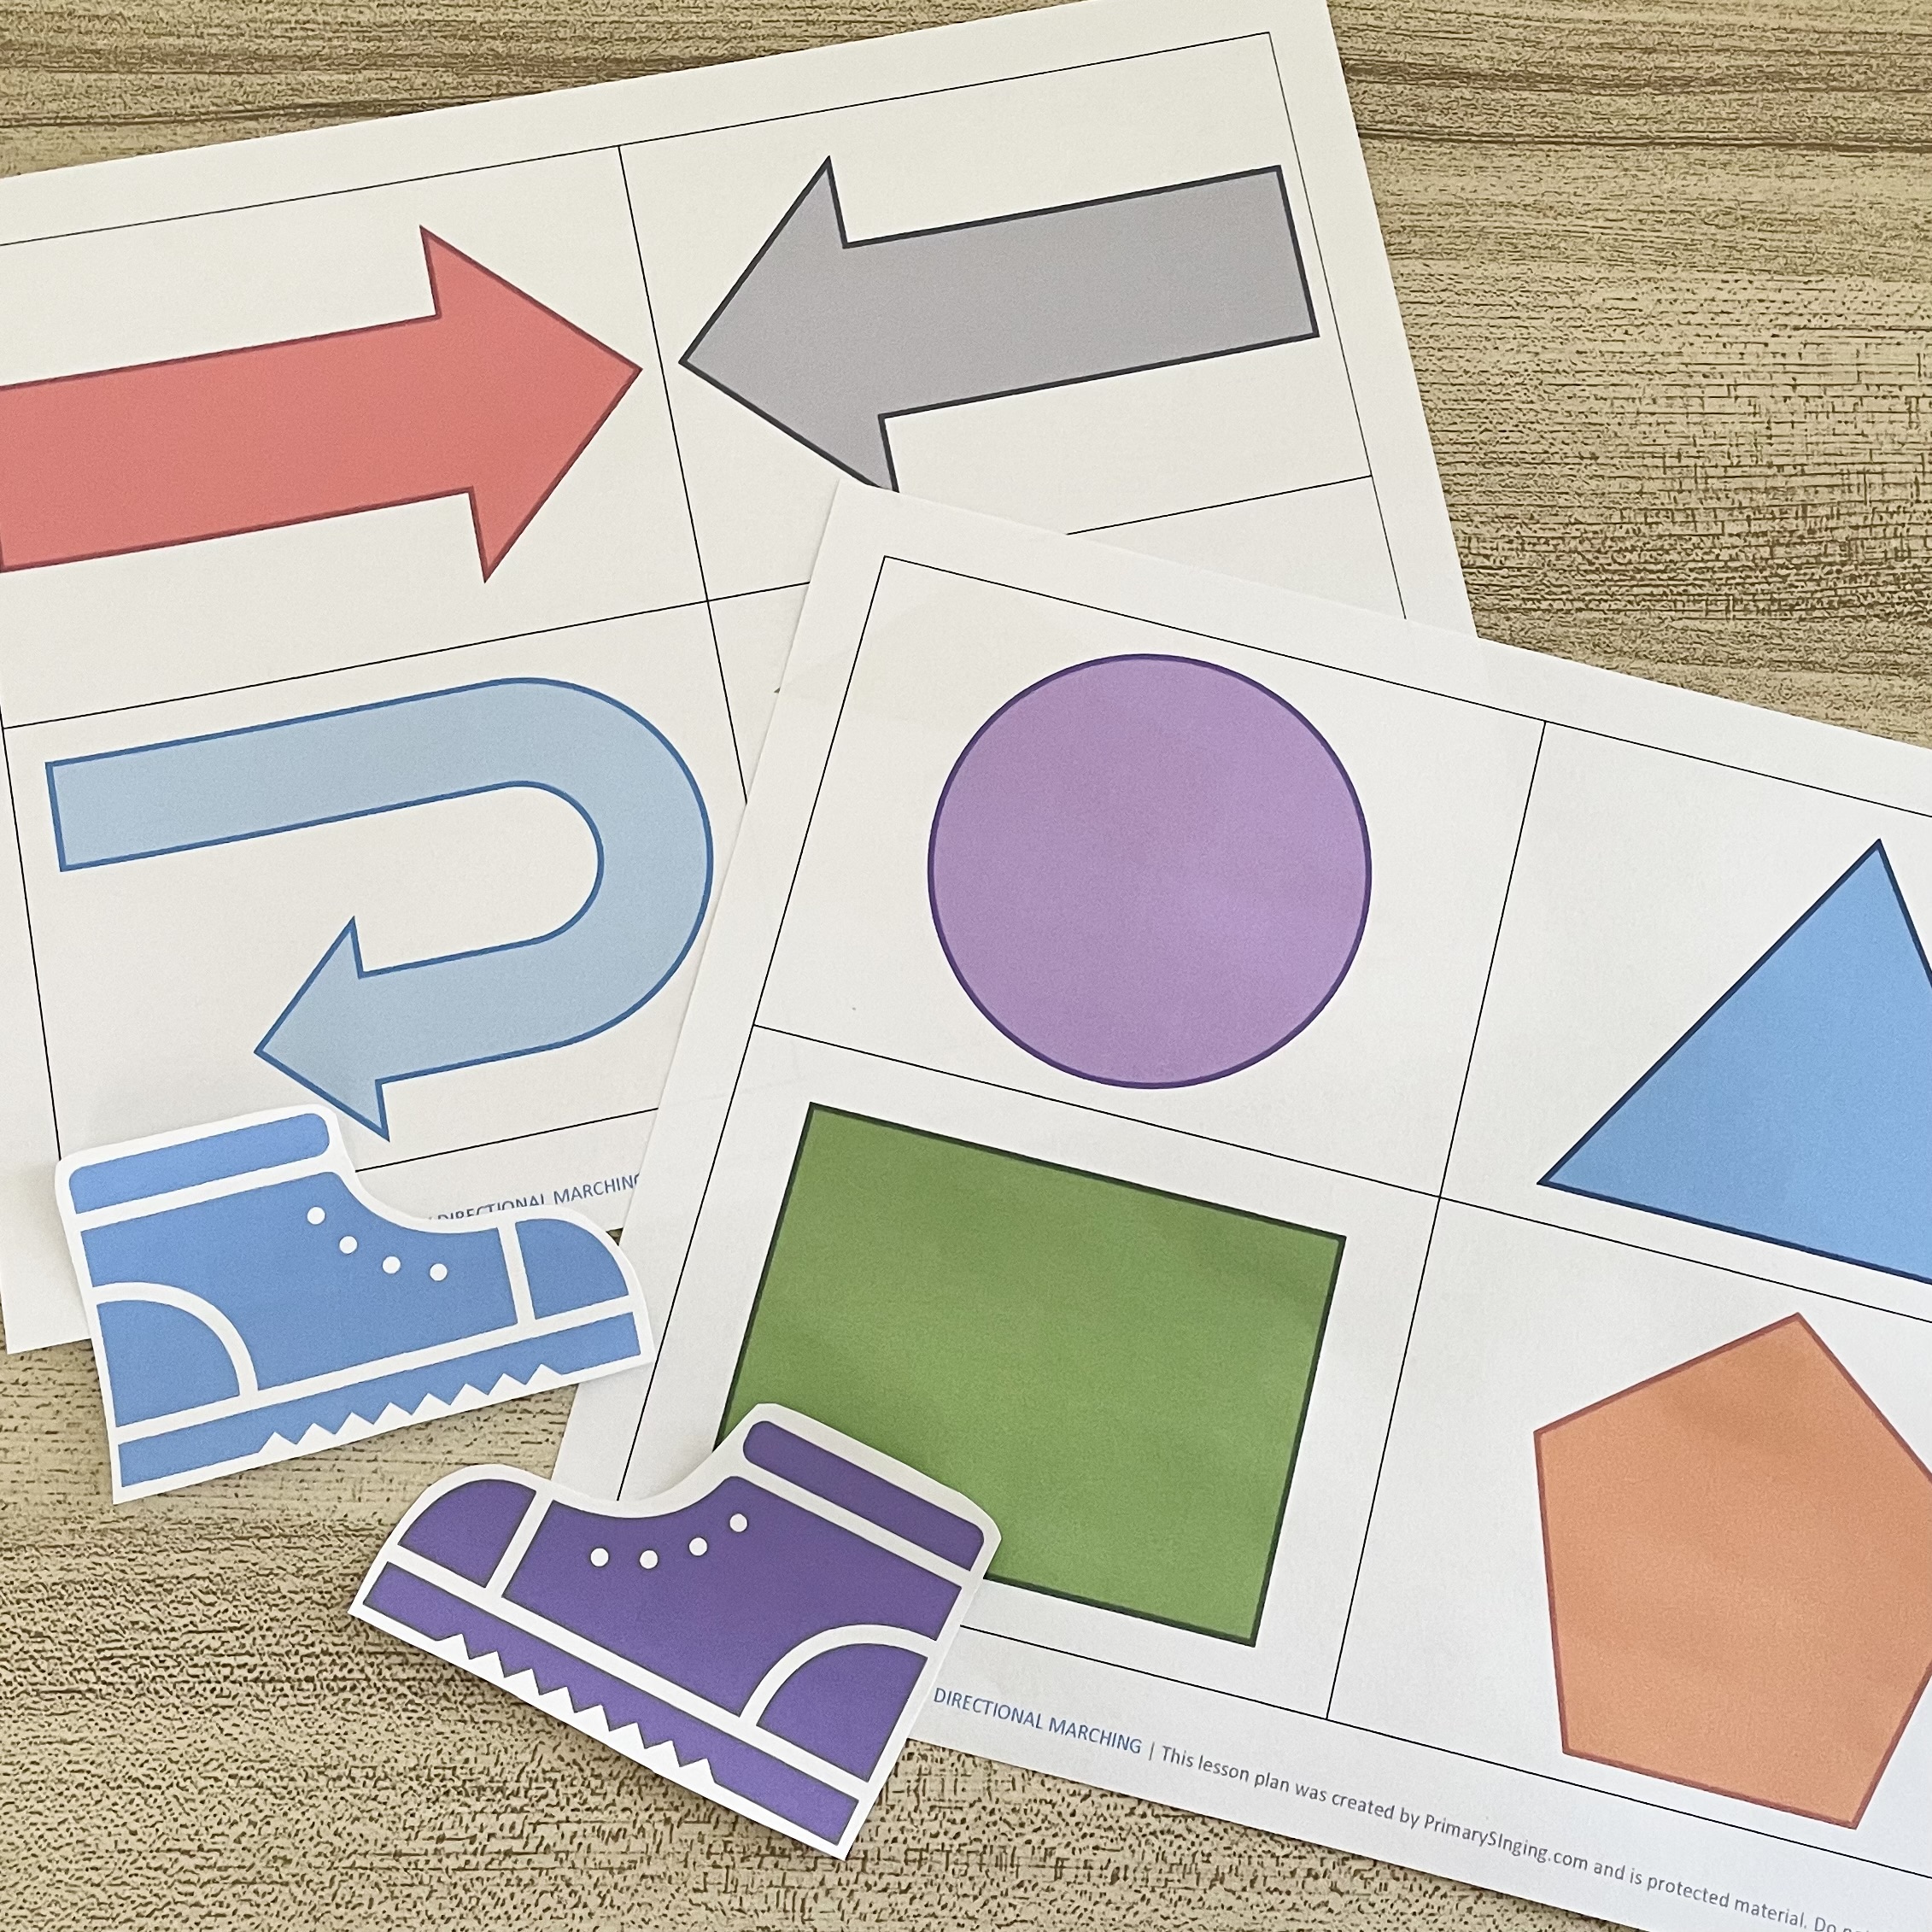 I Want to Be a Missionary Now Directional Marching - Use this fun movement activity and march to the beat with printable shape cards for LDS Primary Music Leaders.